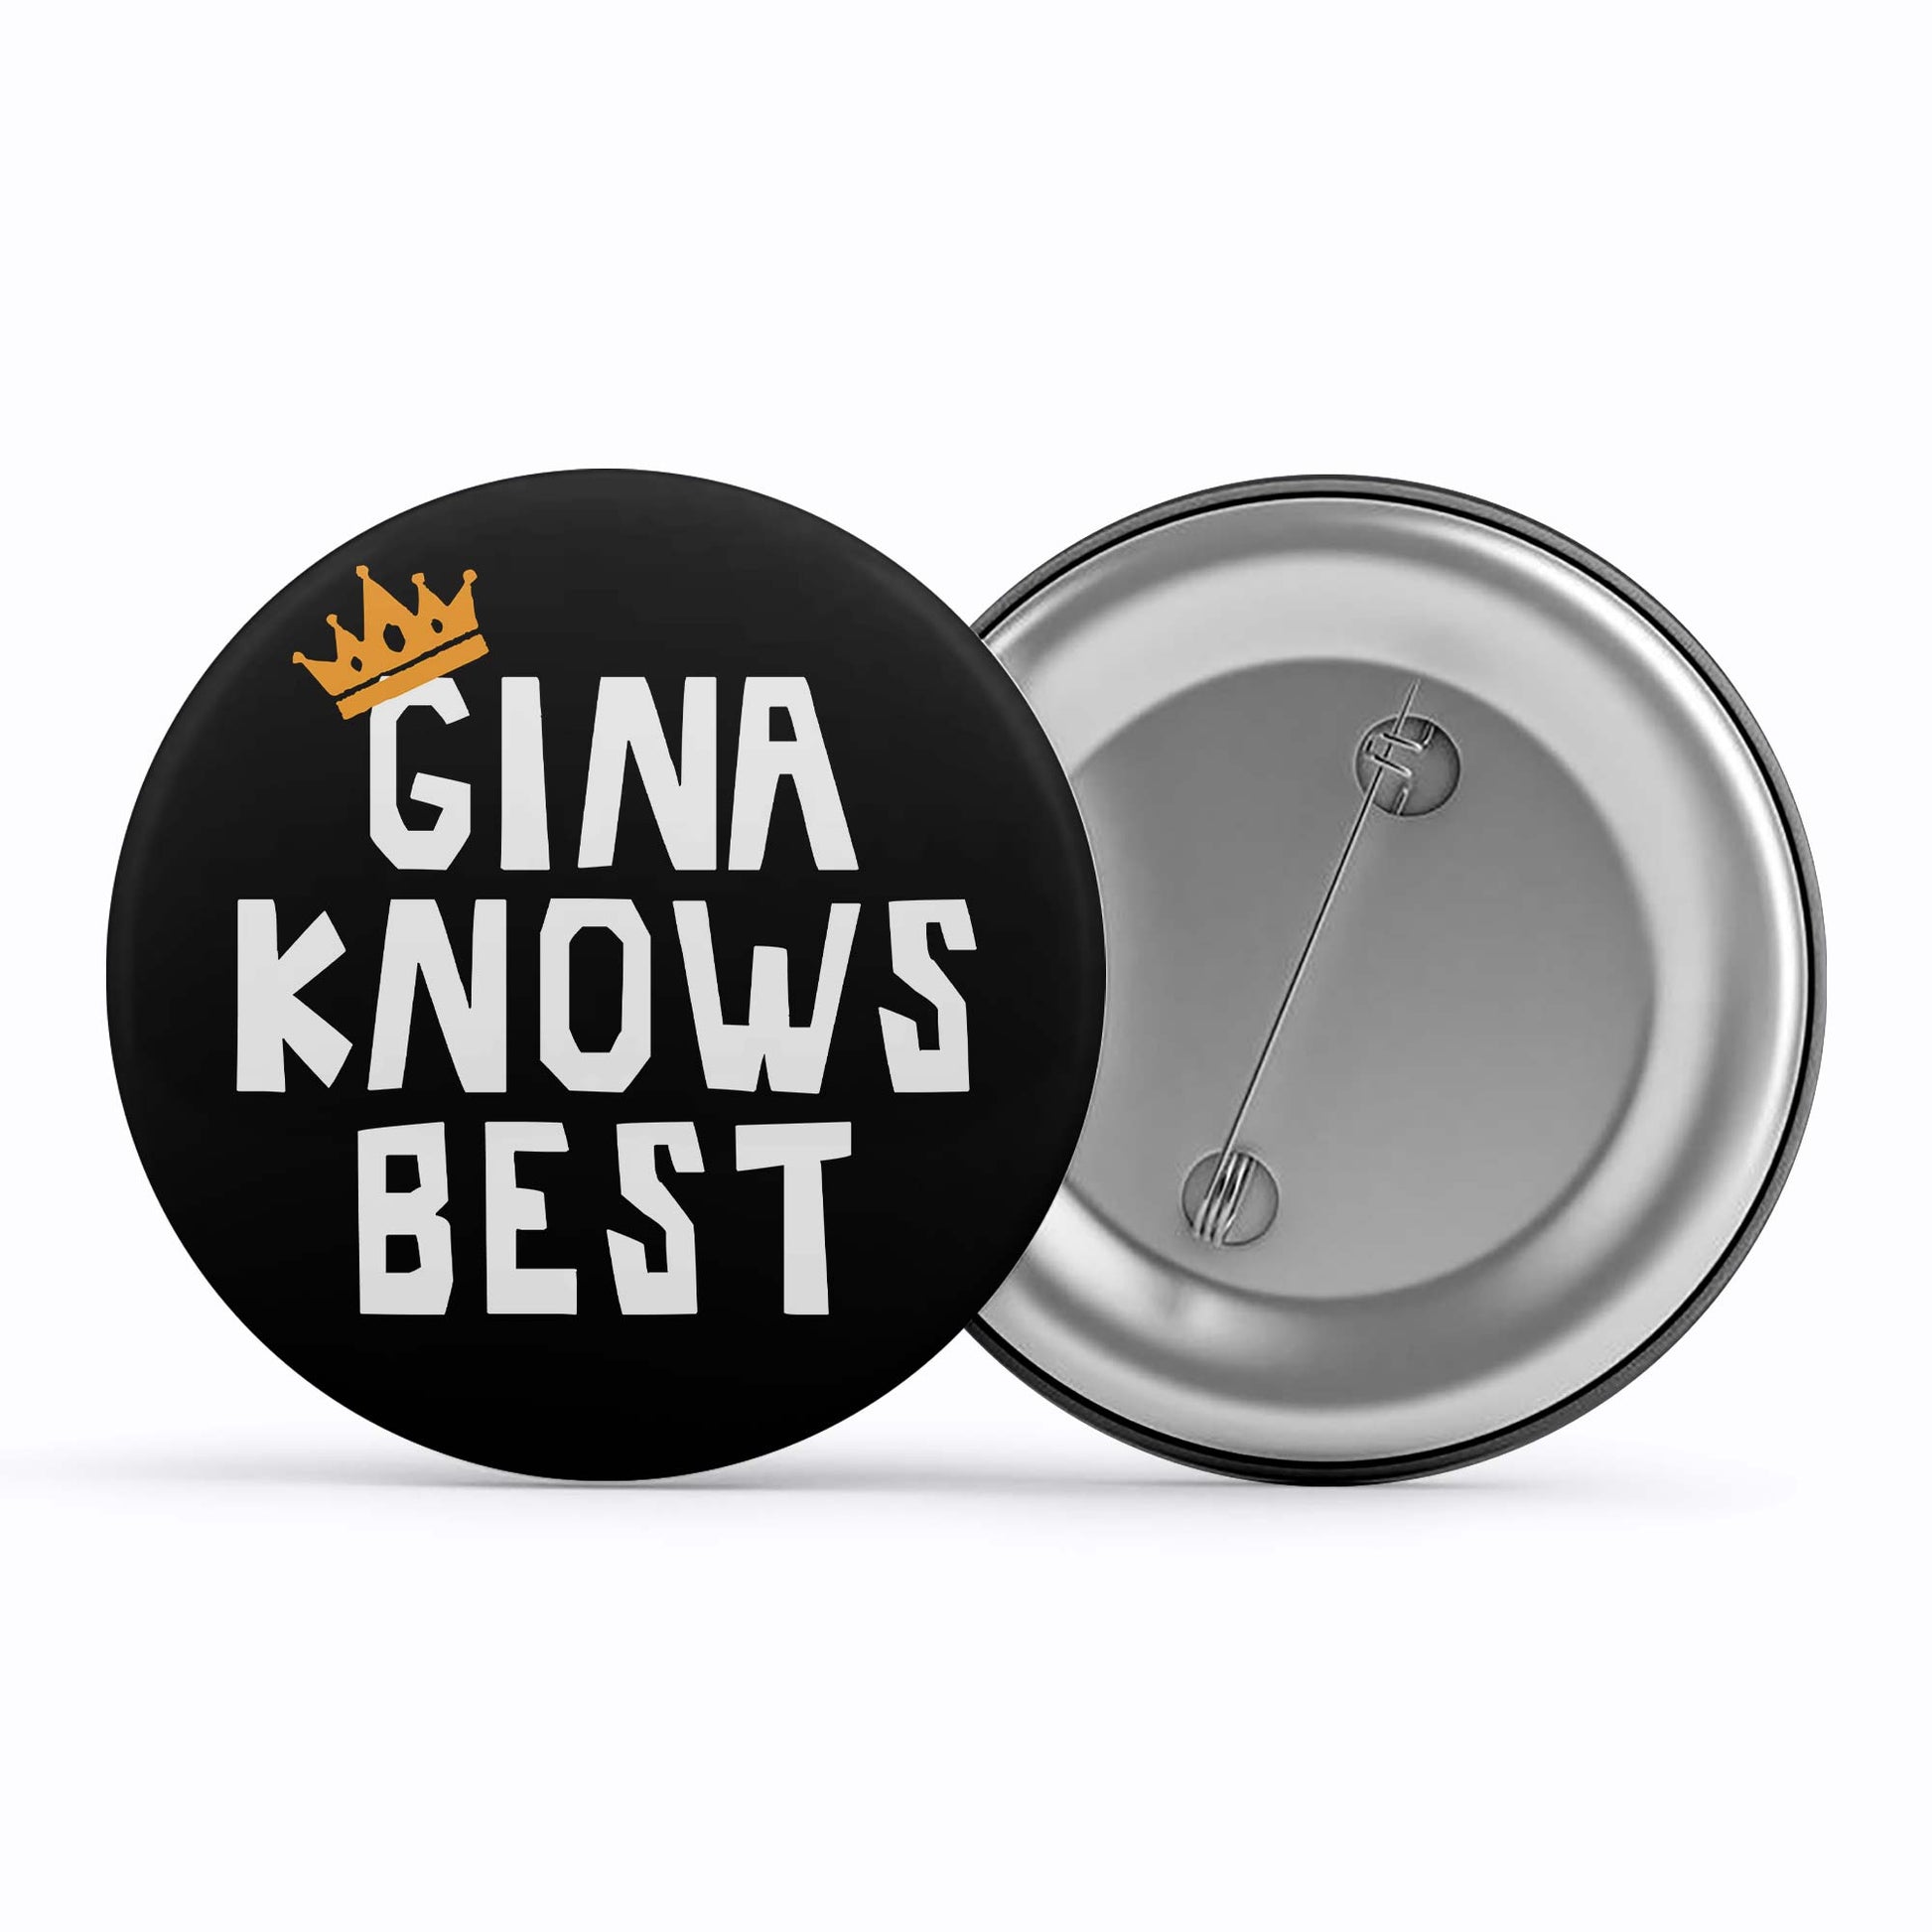 brooklyn nine-nine gina knows best badge pin button buy online india the banyan tee tbt men women girls boys unisex  detective jake peralta terry charles boyle gina linetti andy samberg merchandise clothing acceessories